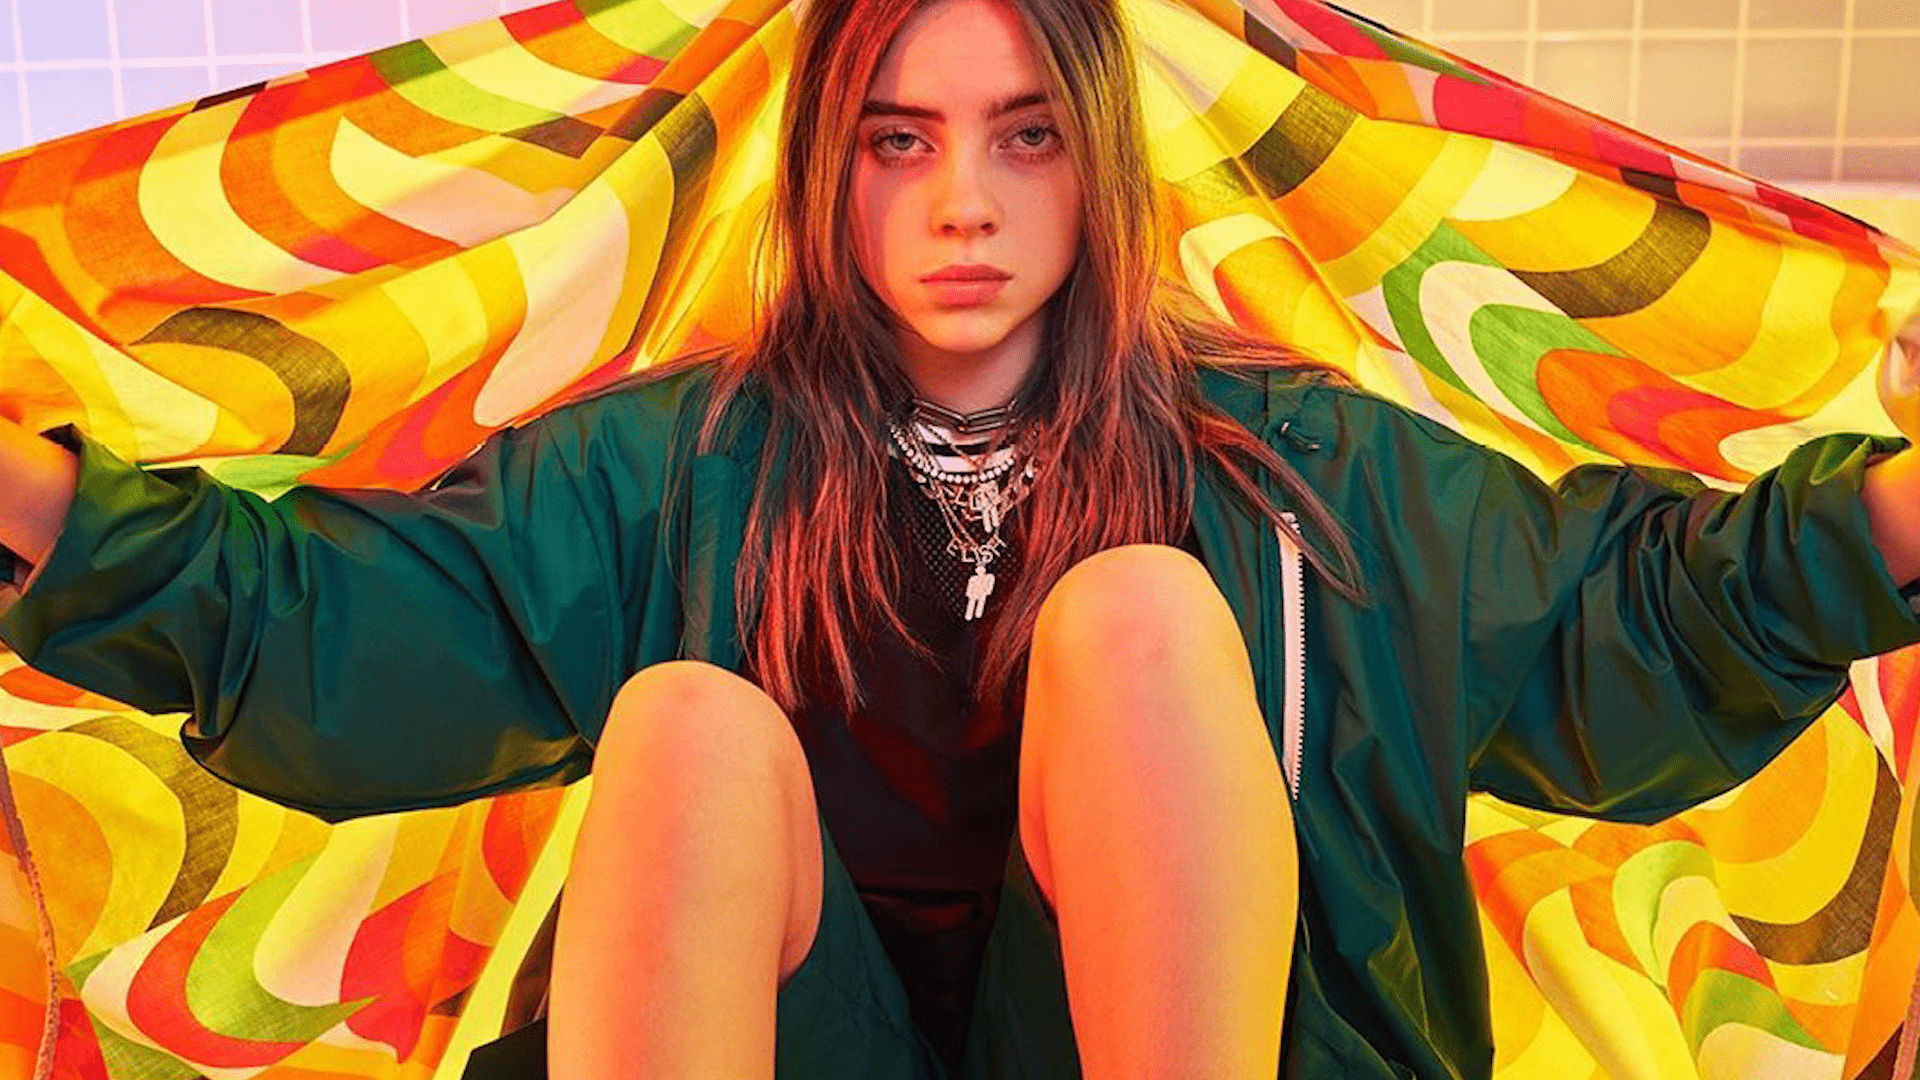 Billie Eilish Revealed Why She Wears Baggy Clothes in Calvin Klein Campaign